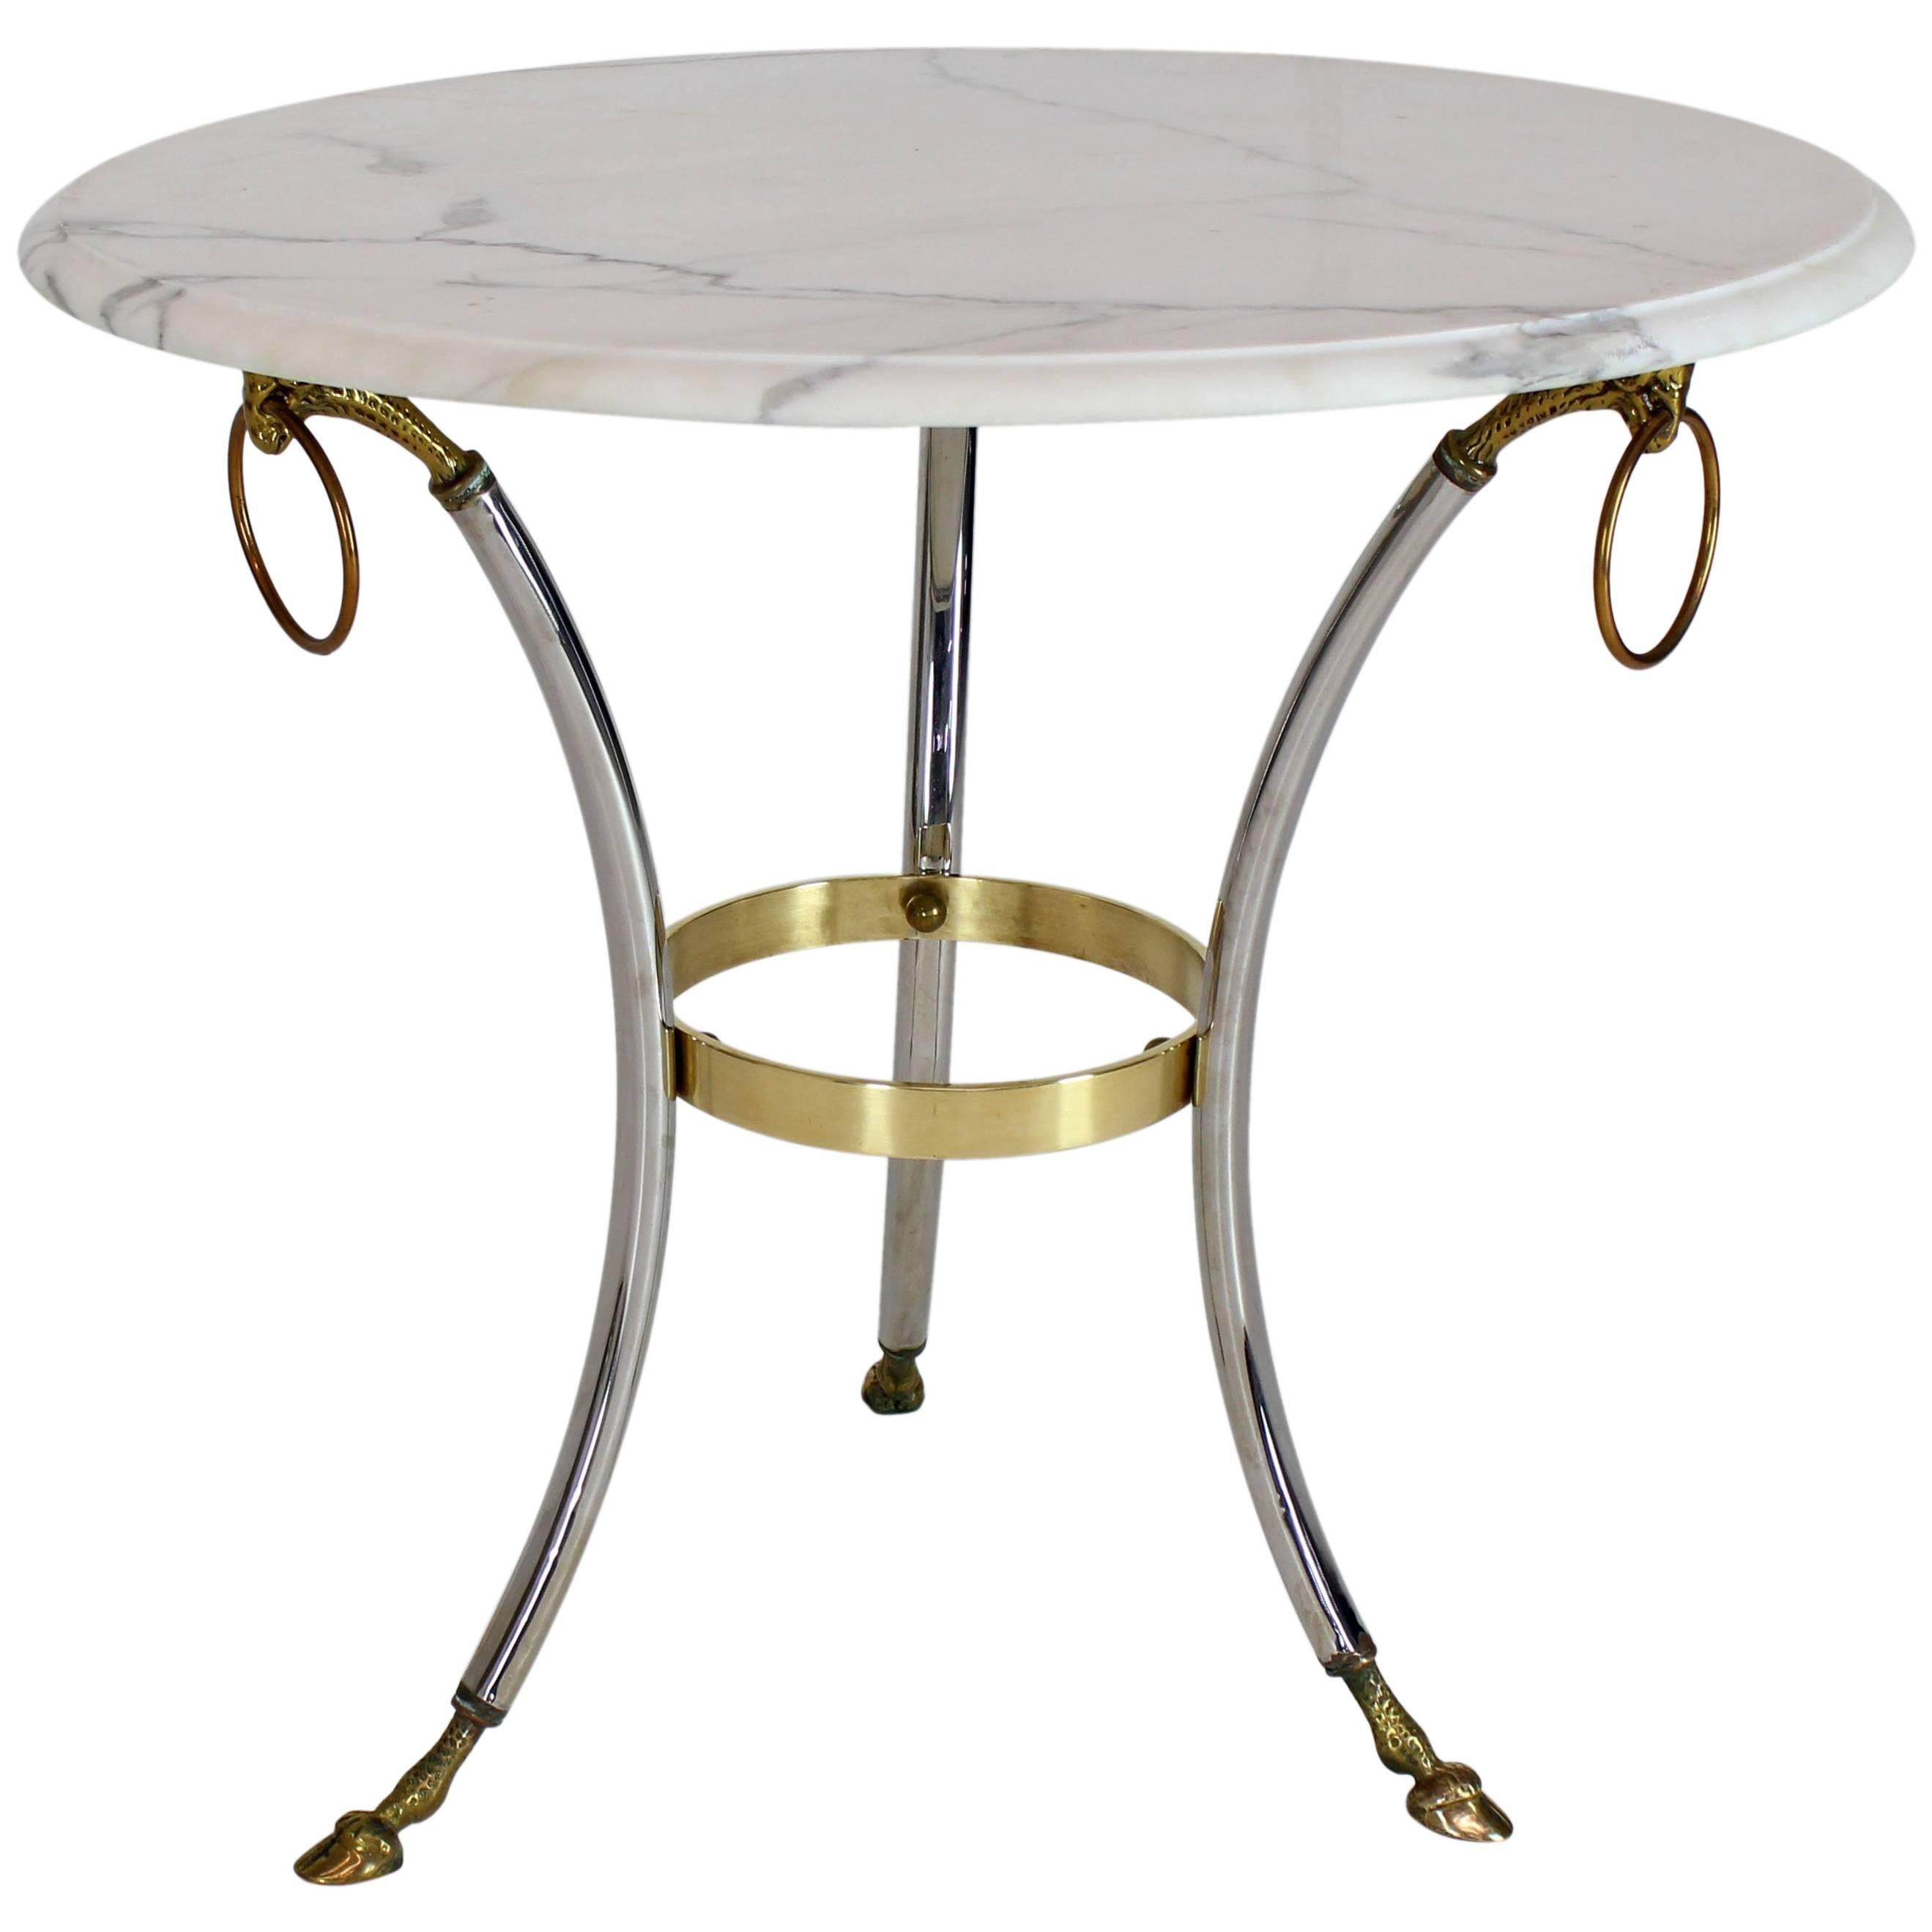 Brass Chrome Marble-Top Hoof Feet Large Rings Accents Gueridon Centre Table For Sale